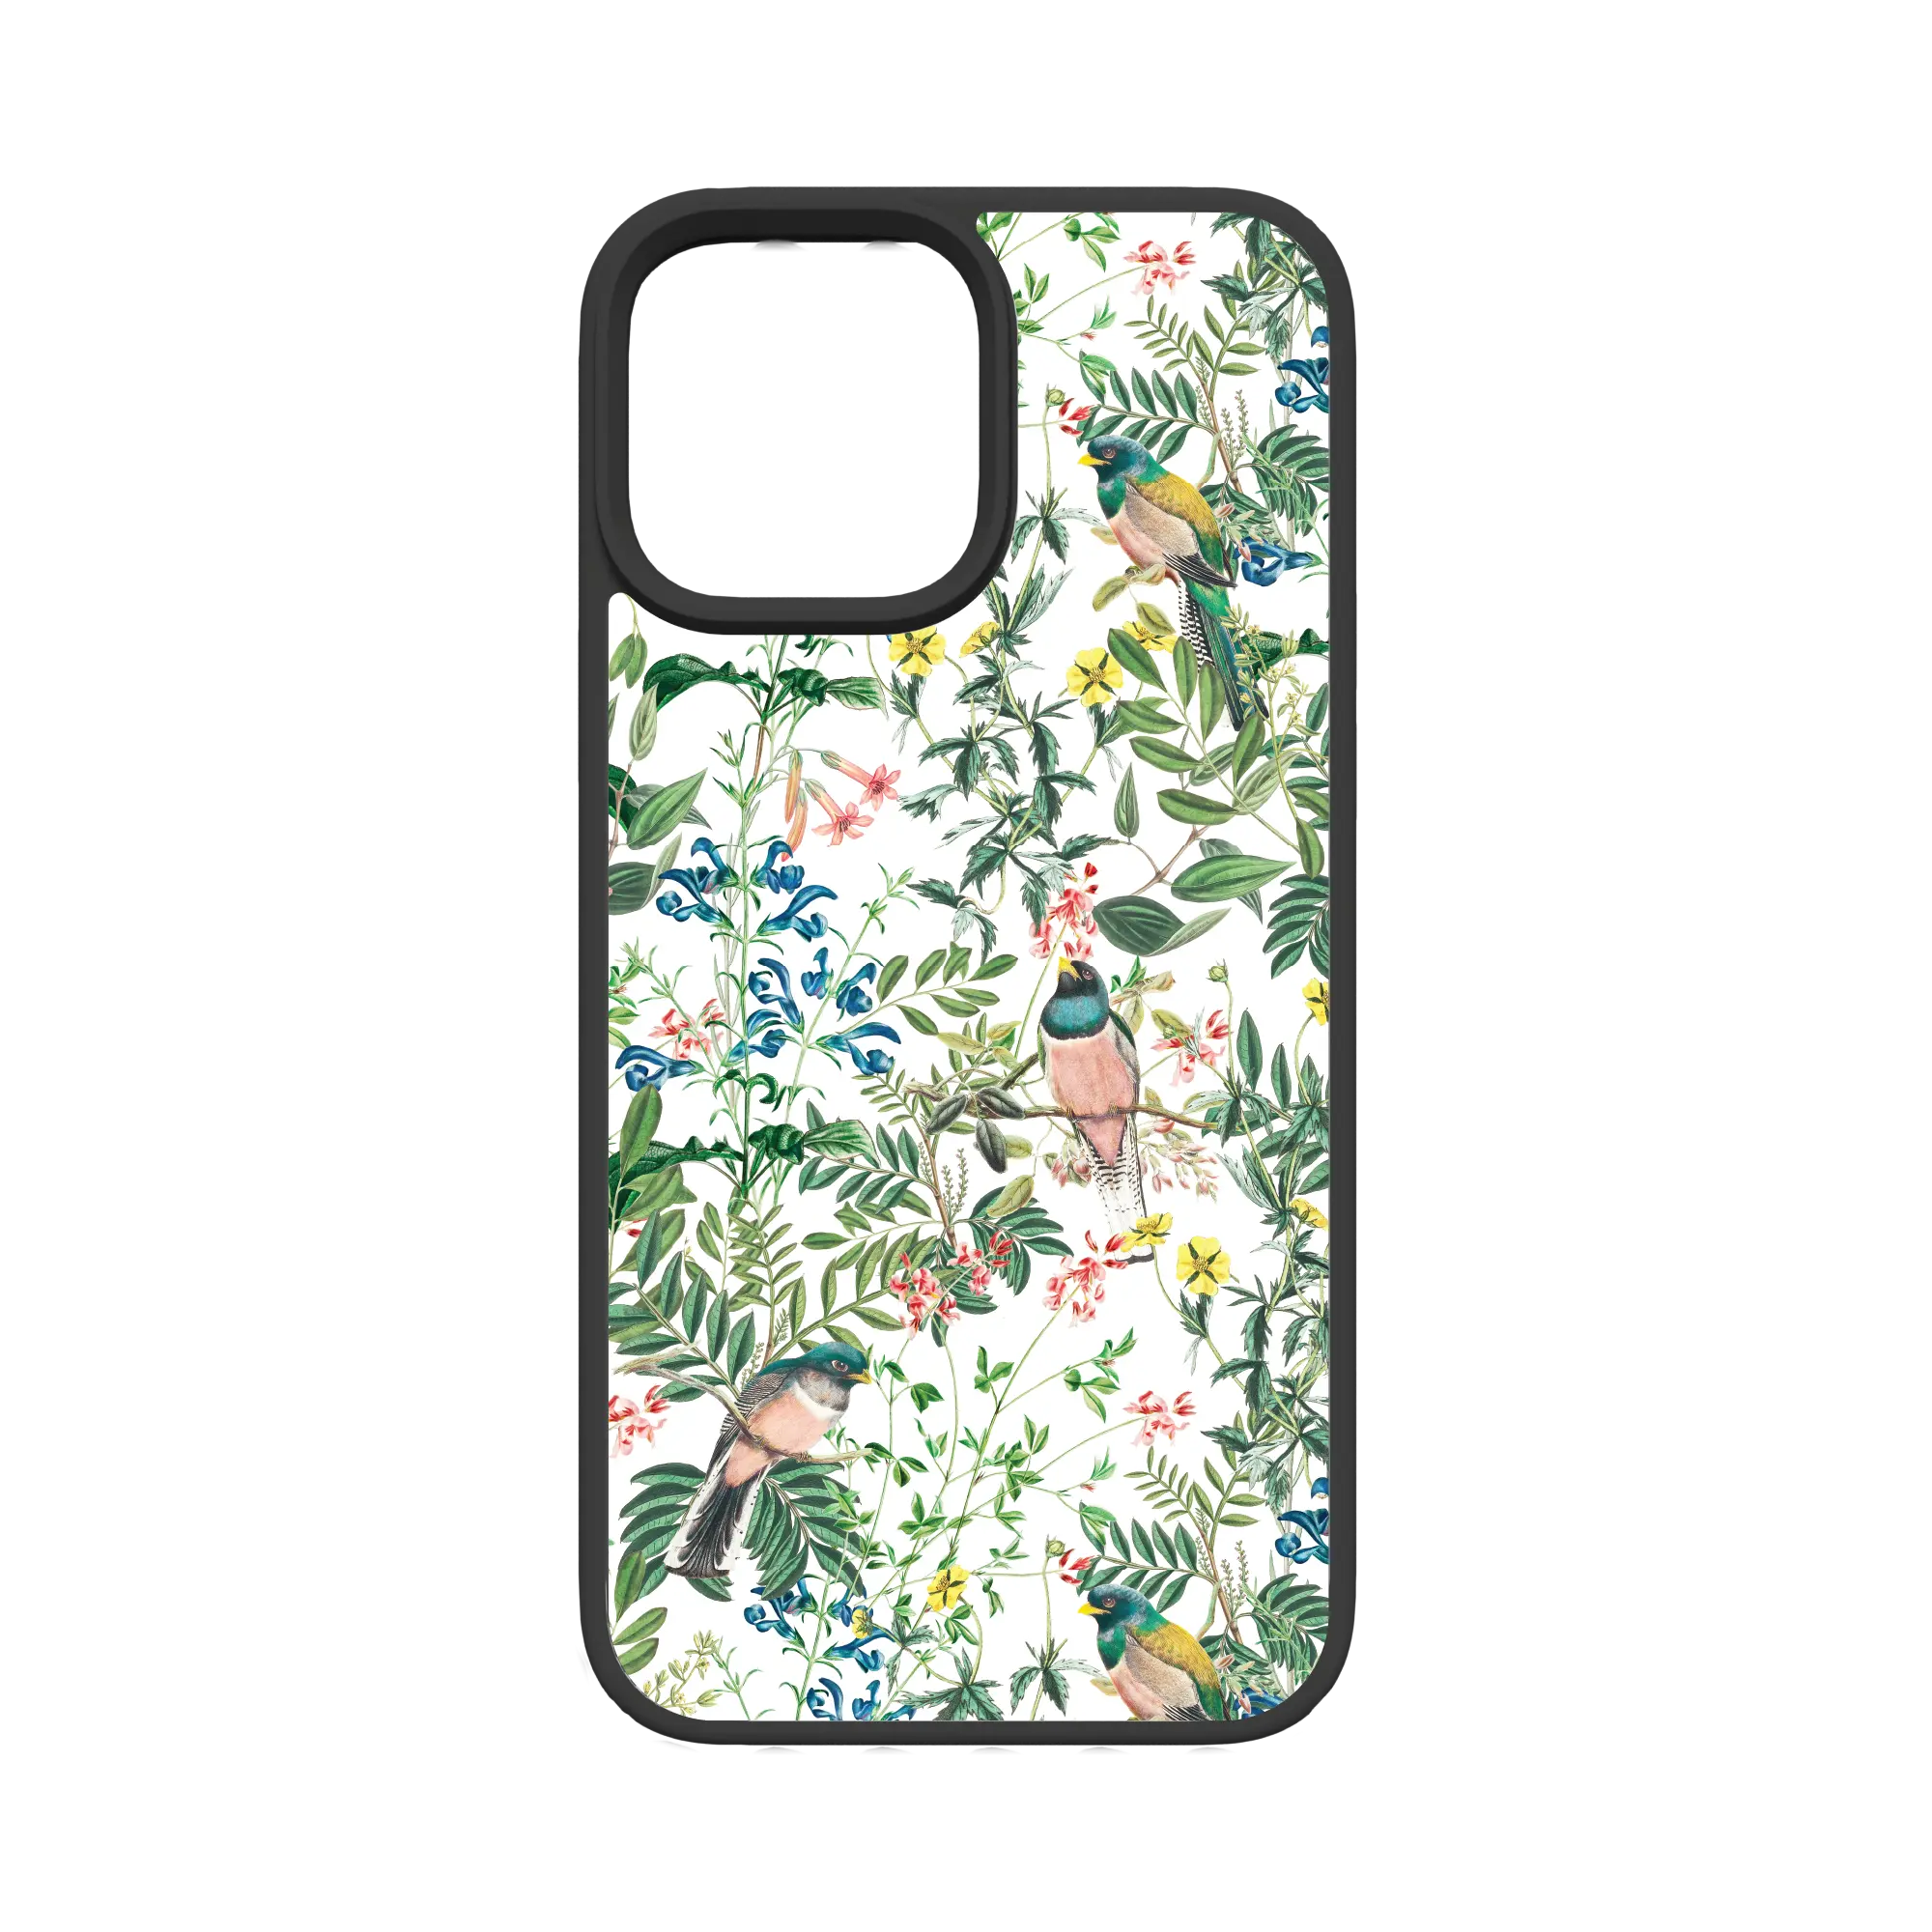 Apple-iPhone-12-Pro-Max-Crystal-Clear Oasis Blossom | Protective MagSafe Floral Bird Case | Birds and Bees Series for Apple iPhone 12 Series cellhelmet cellhelmet